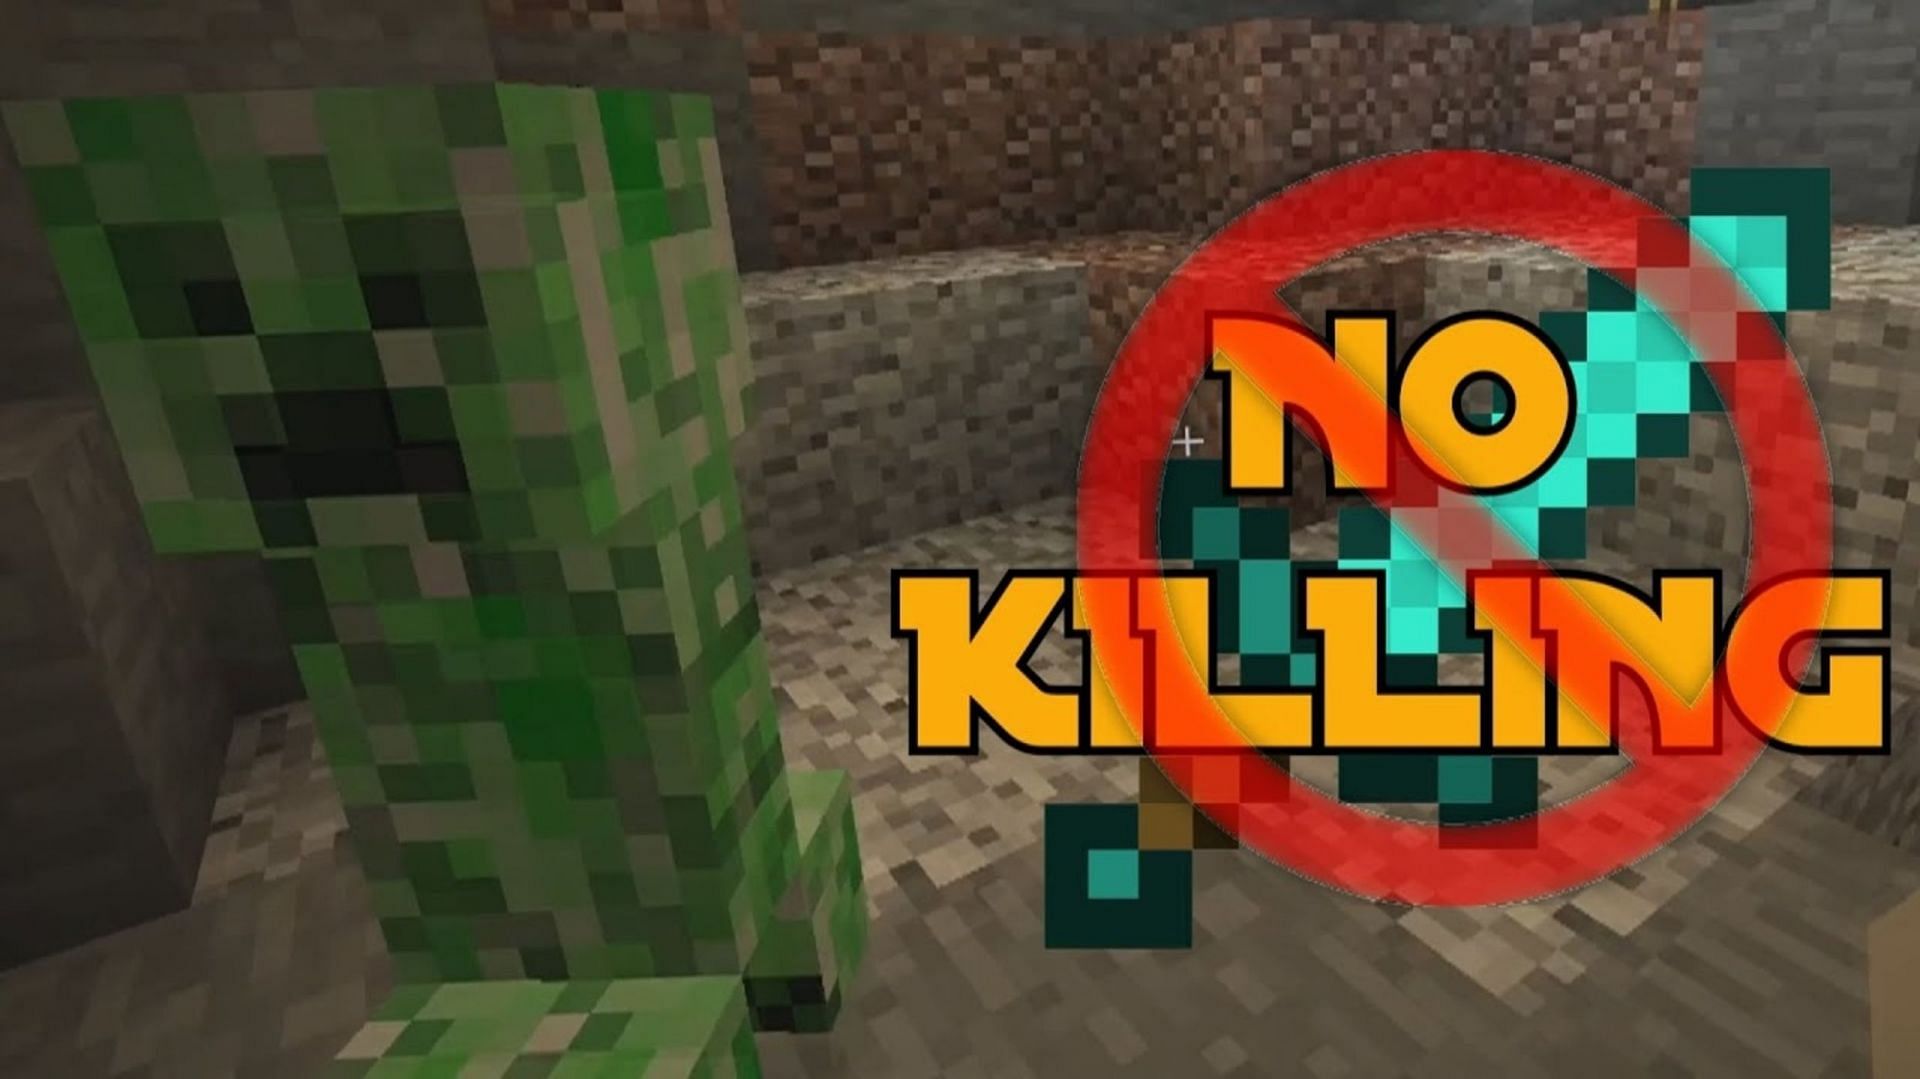 In the Pacifist challenge, players cannot attack or kill any mobs (Image via Peppoli/Youtube)